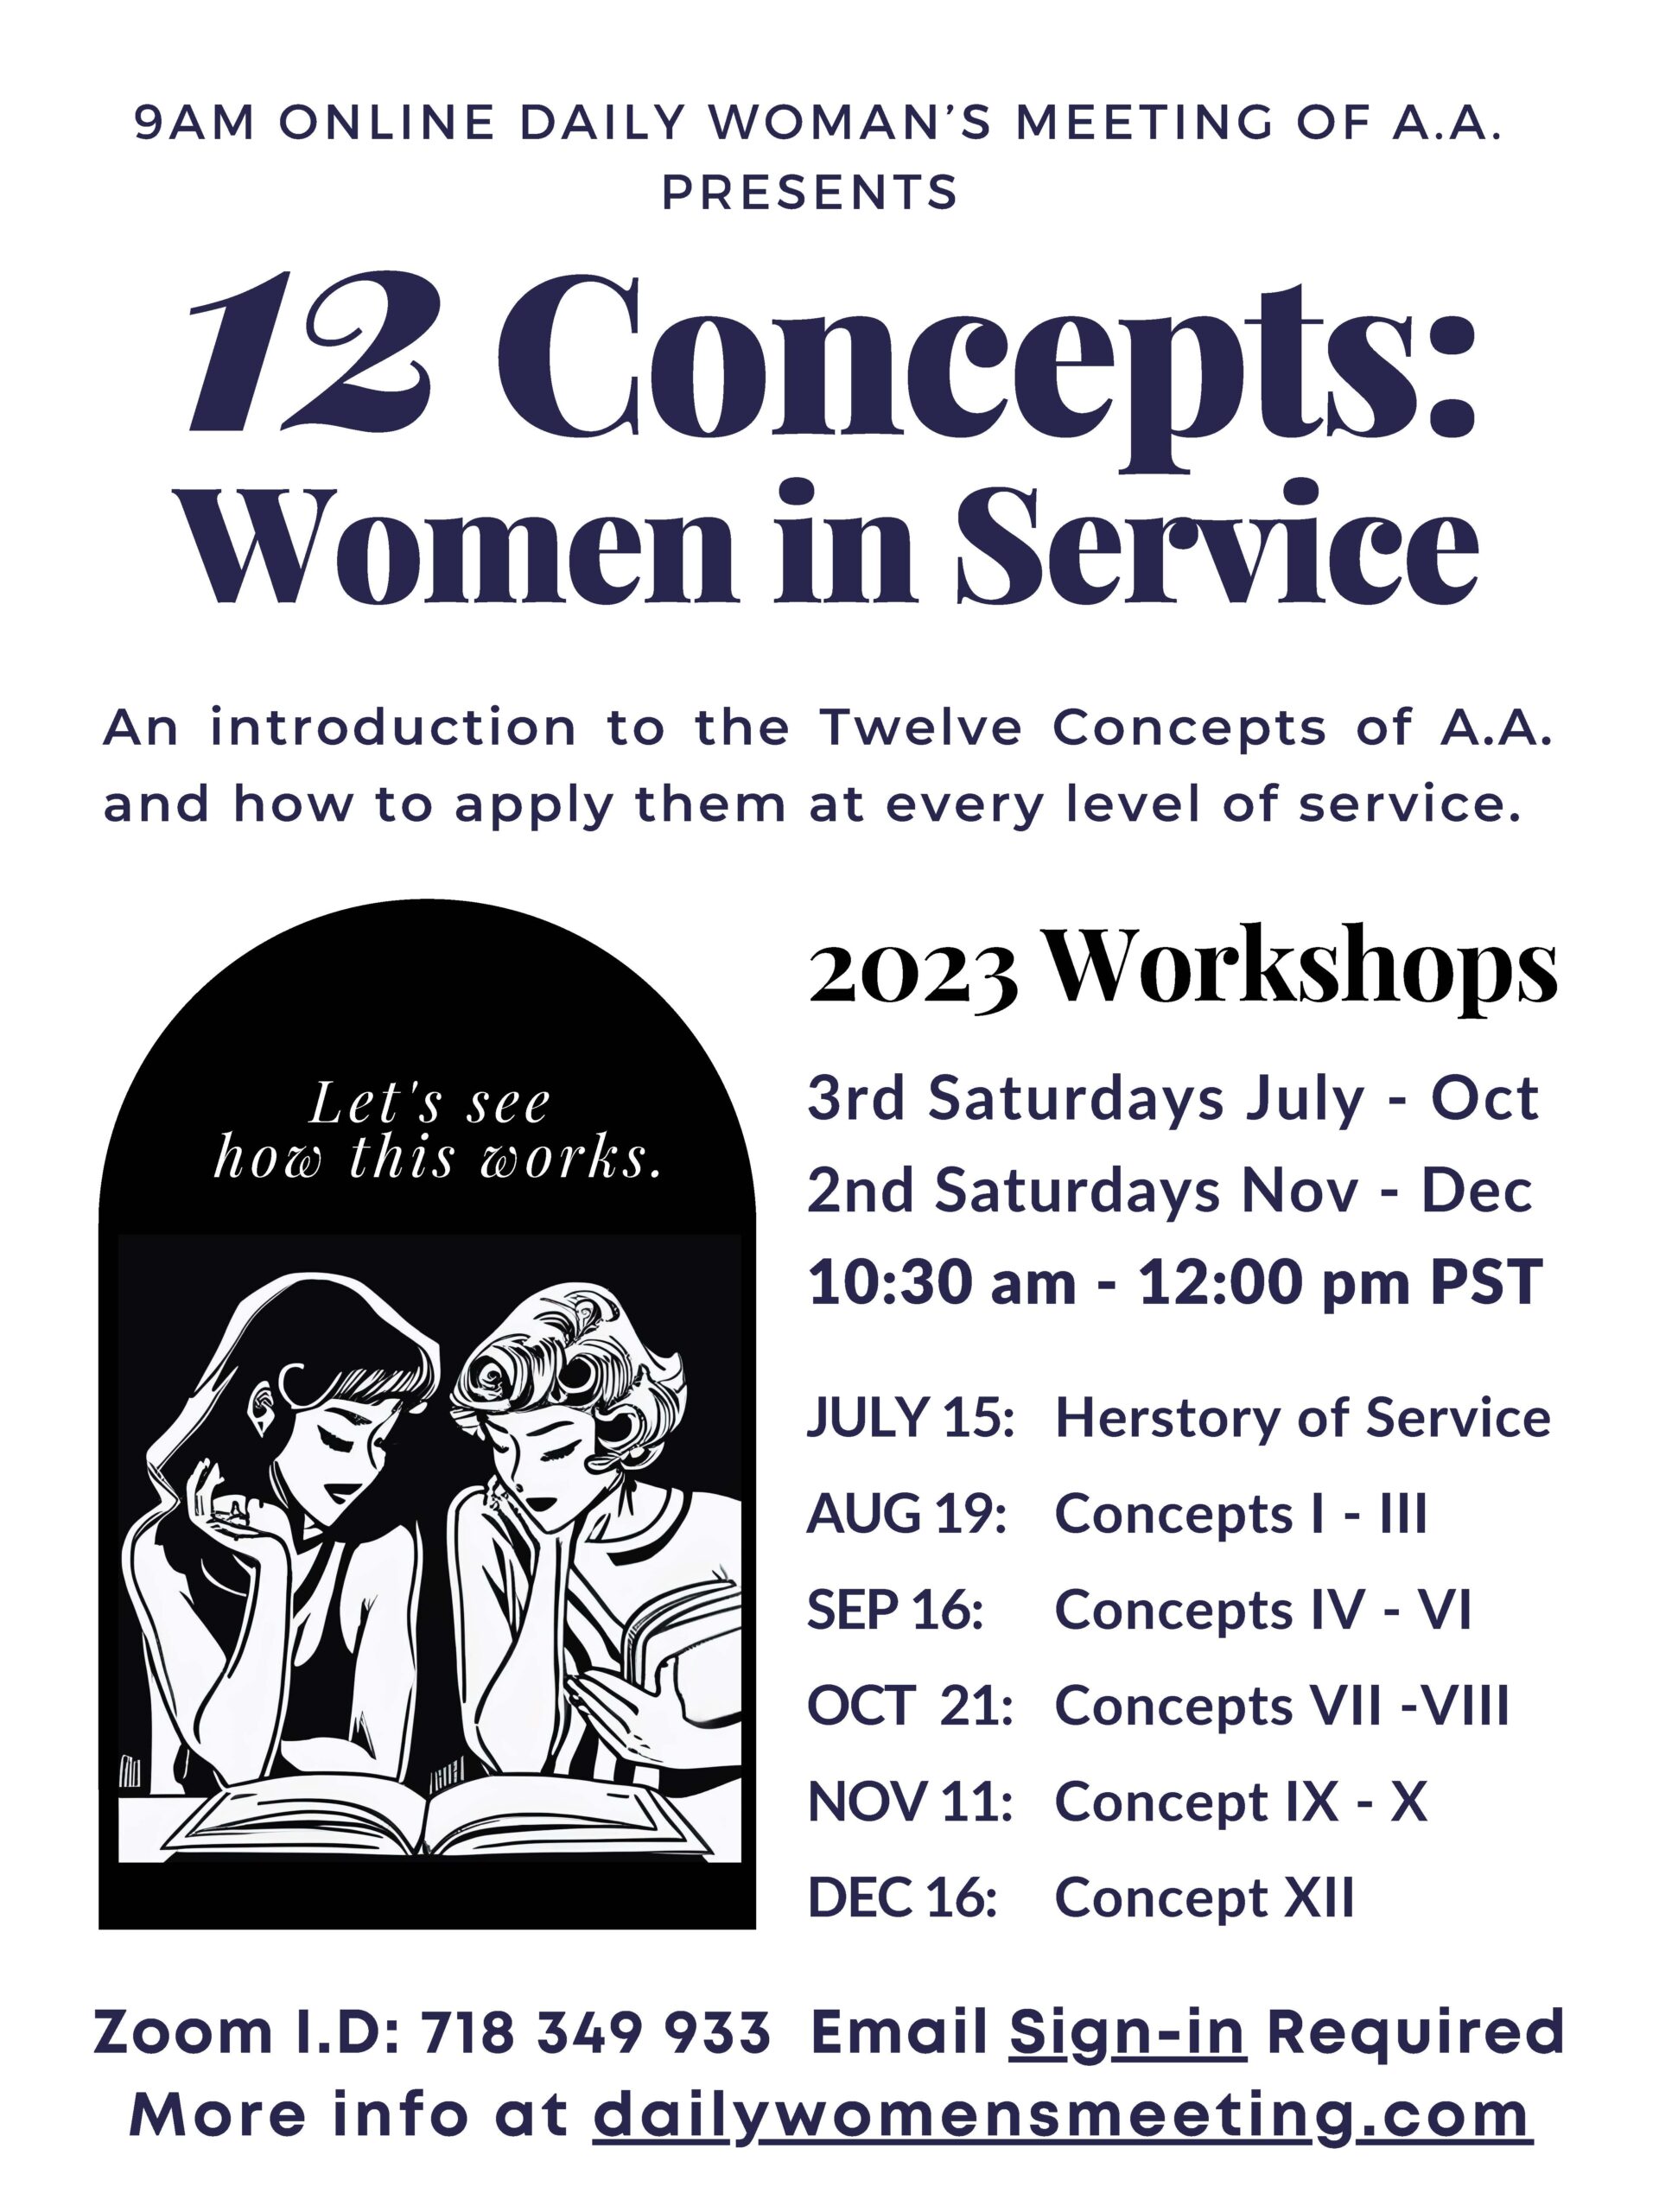 12 Concepts: Women in Service